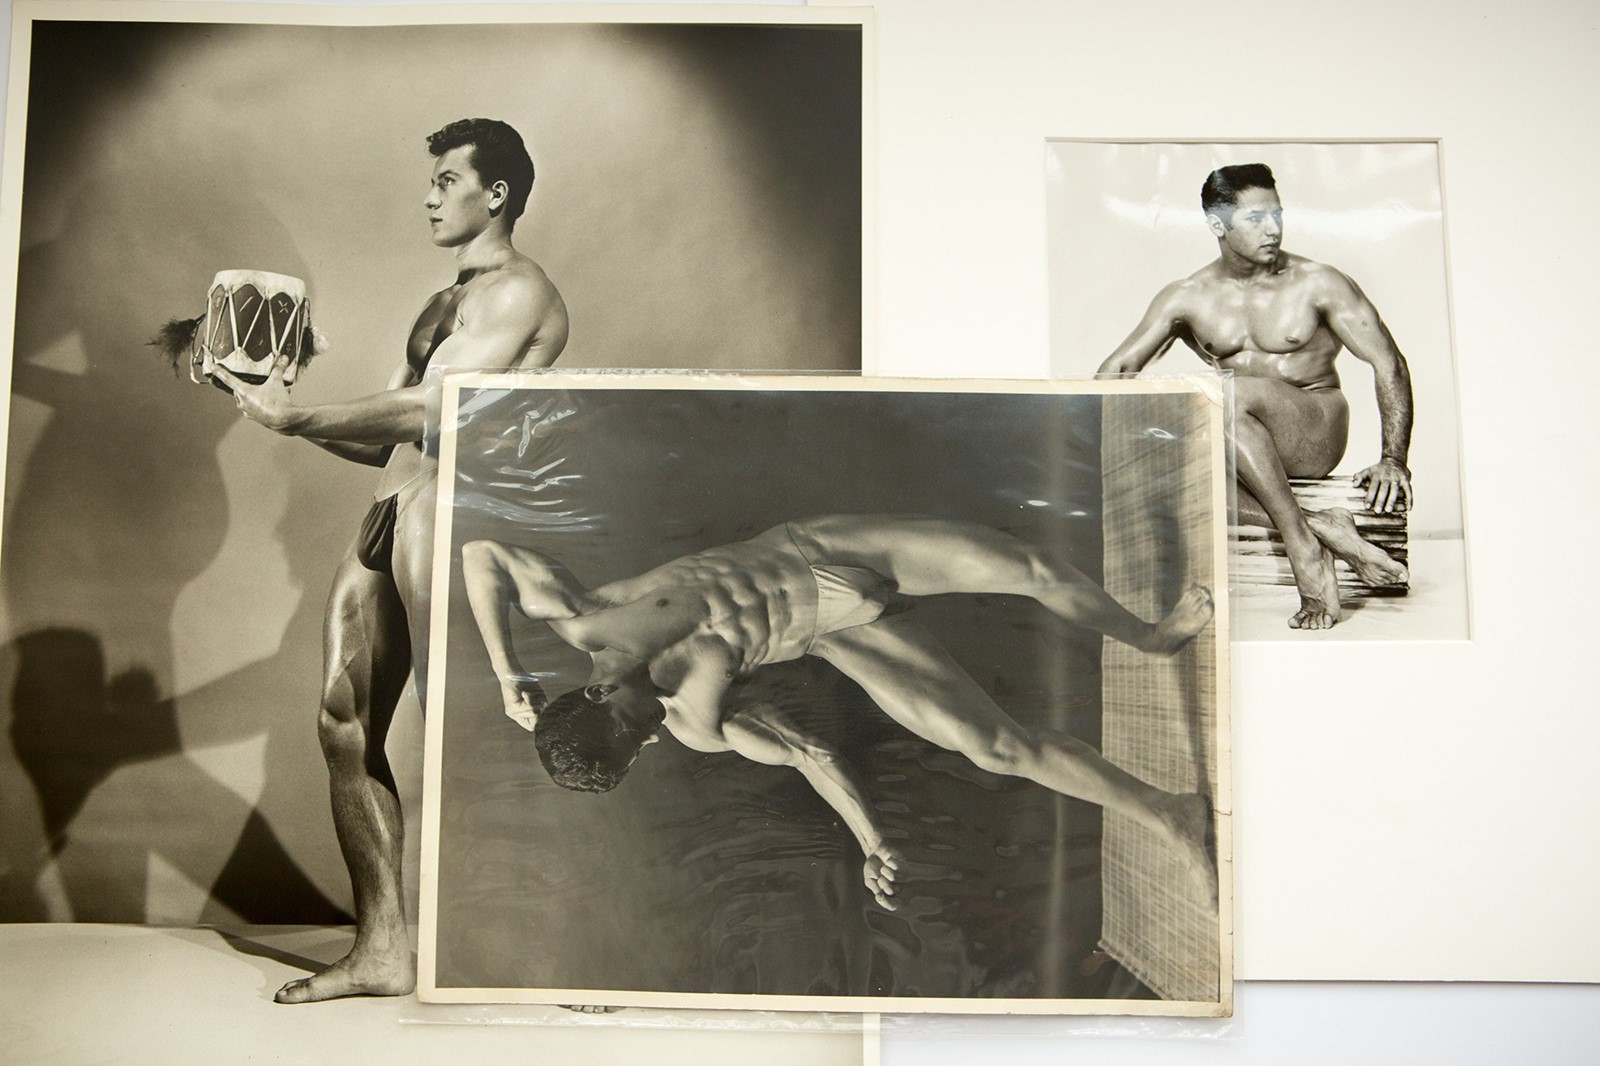 Miles Chapman’s collection of 20th-century male erotica